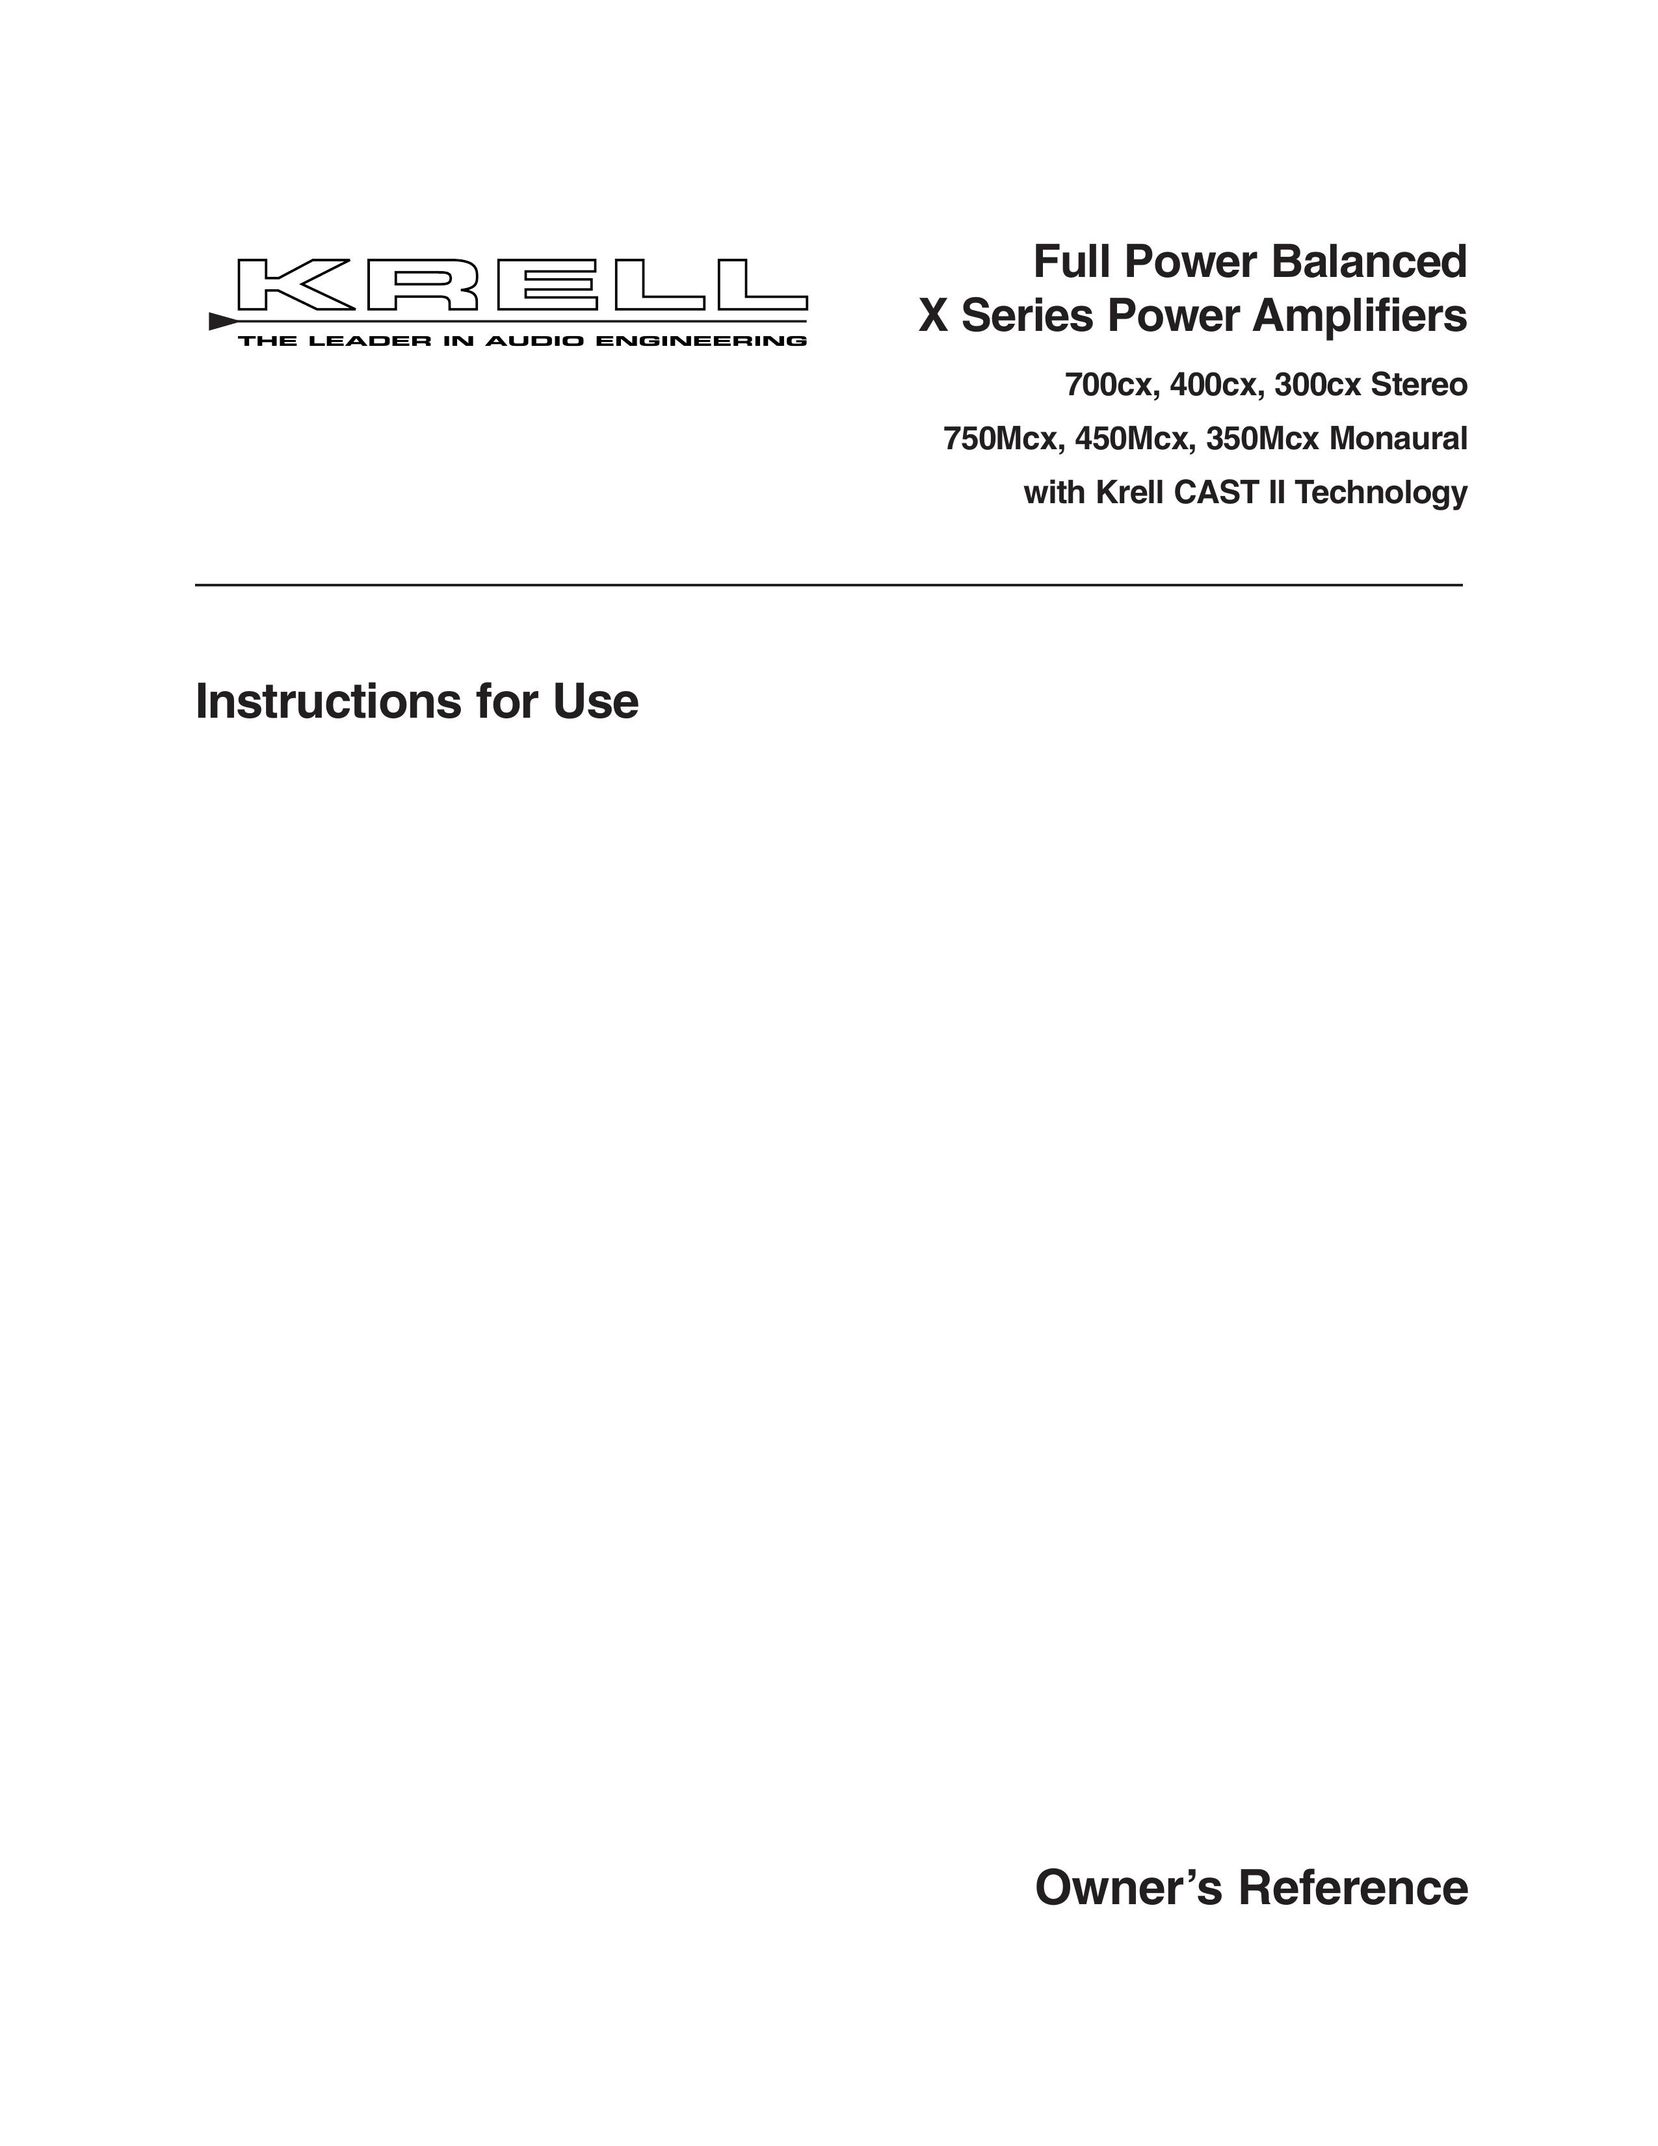 Krell Industries 400cx Stereo Amplifier User Manual